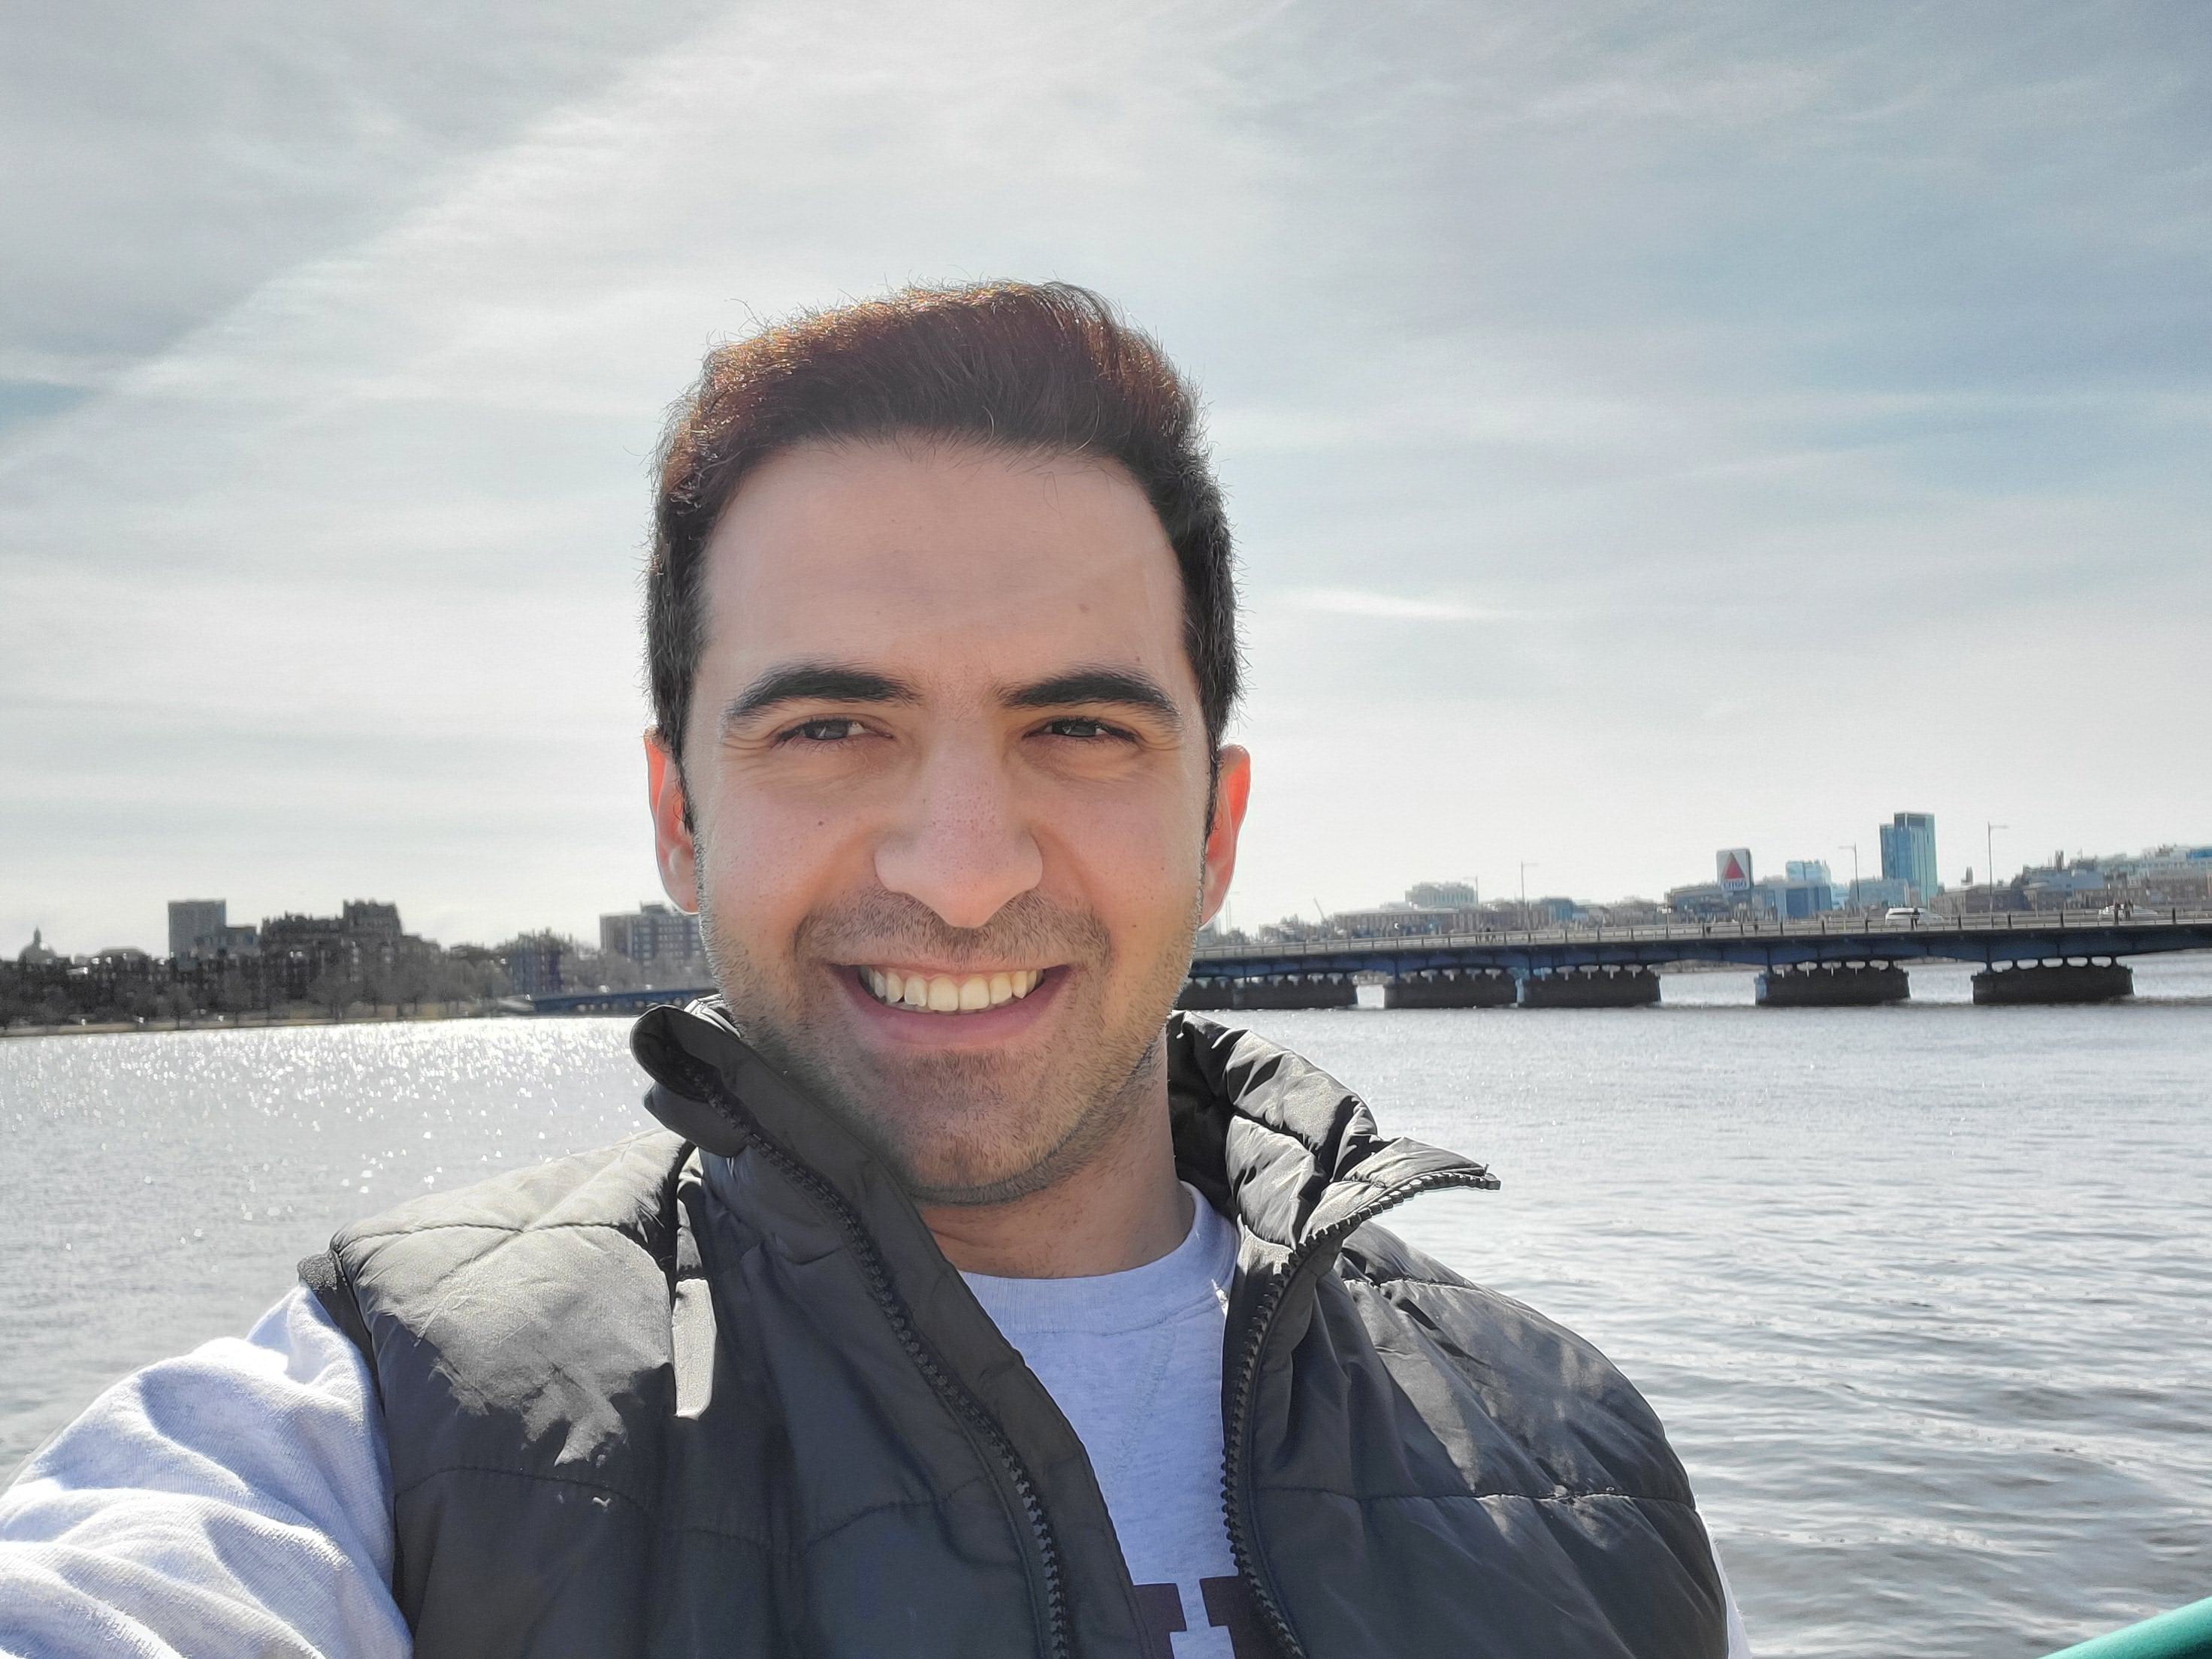 A picture of Khaled in front of the Charles river in Boston.